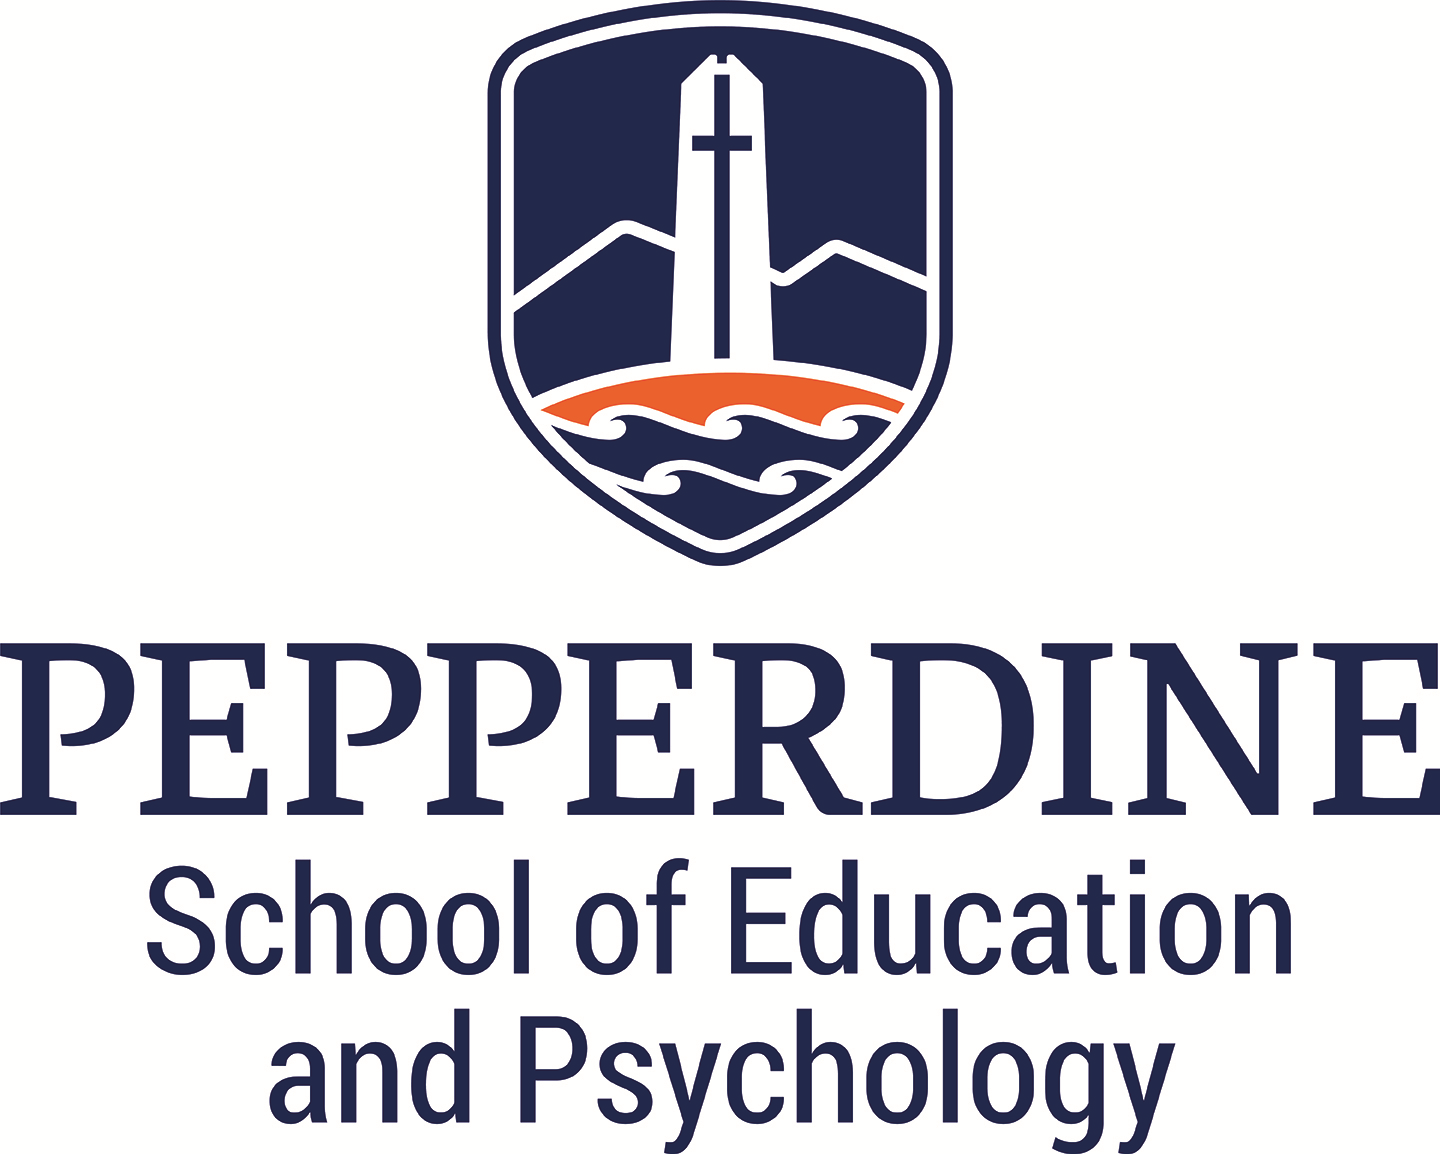 Master’s Clinical Psychology (Licensed Professional Counselor) Program at Pepperdine University